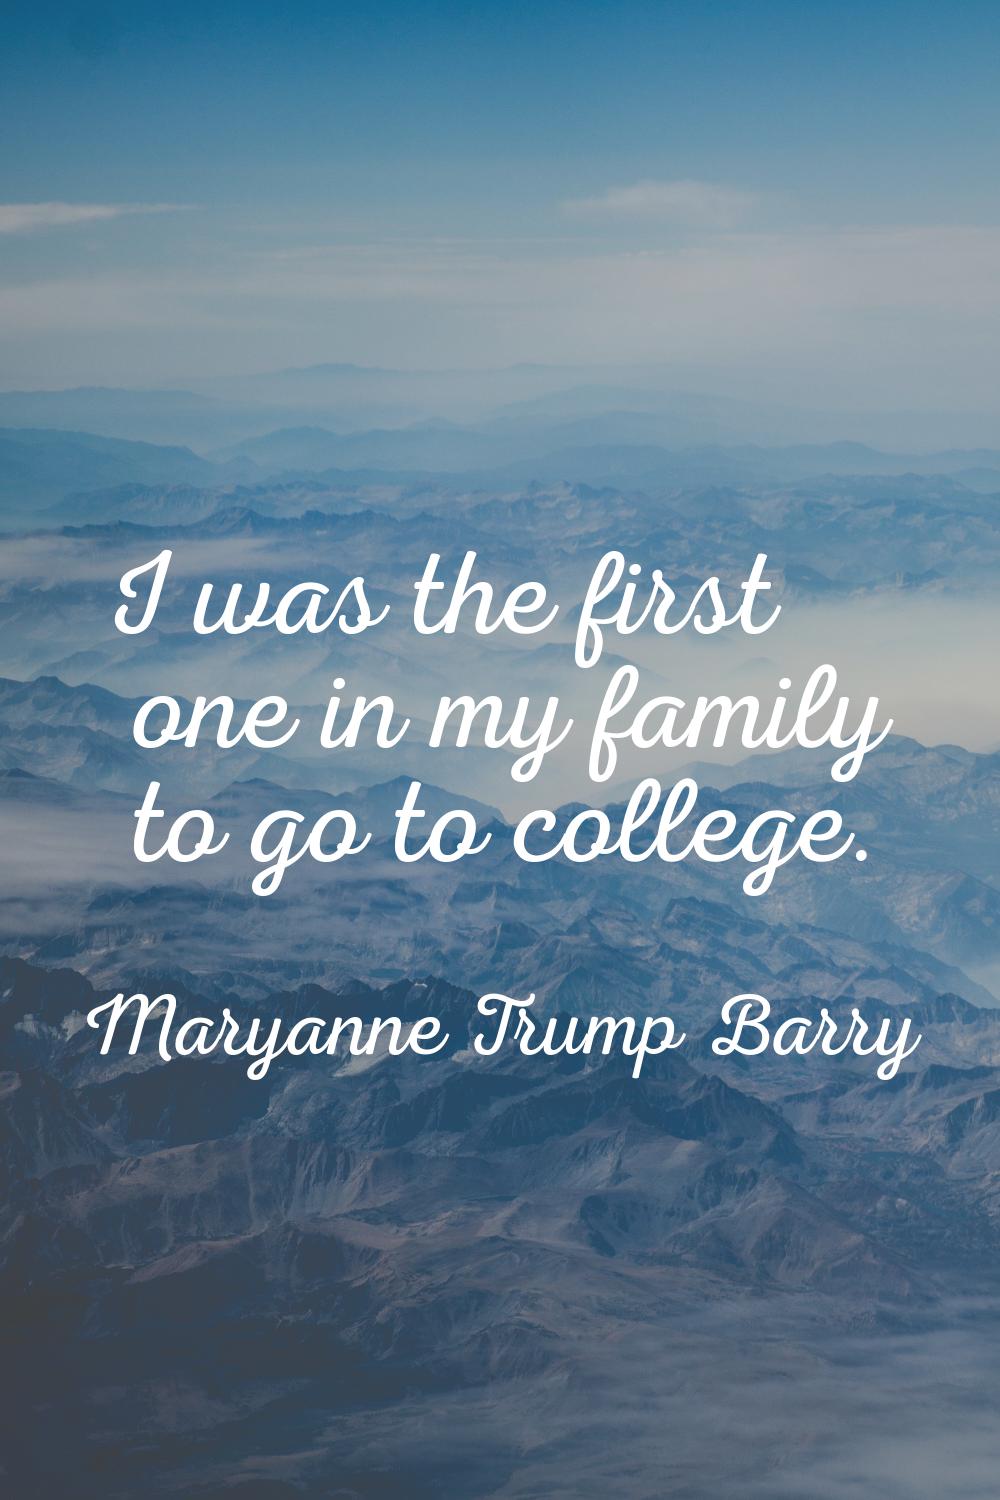 I was the first one in my family to go to college.